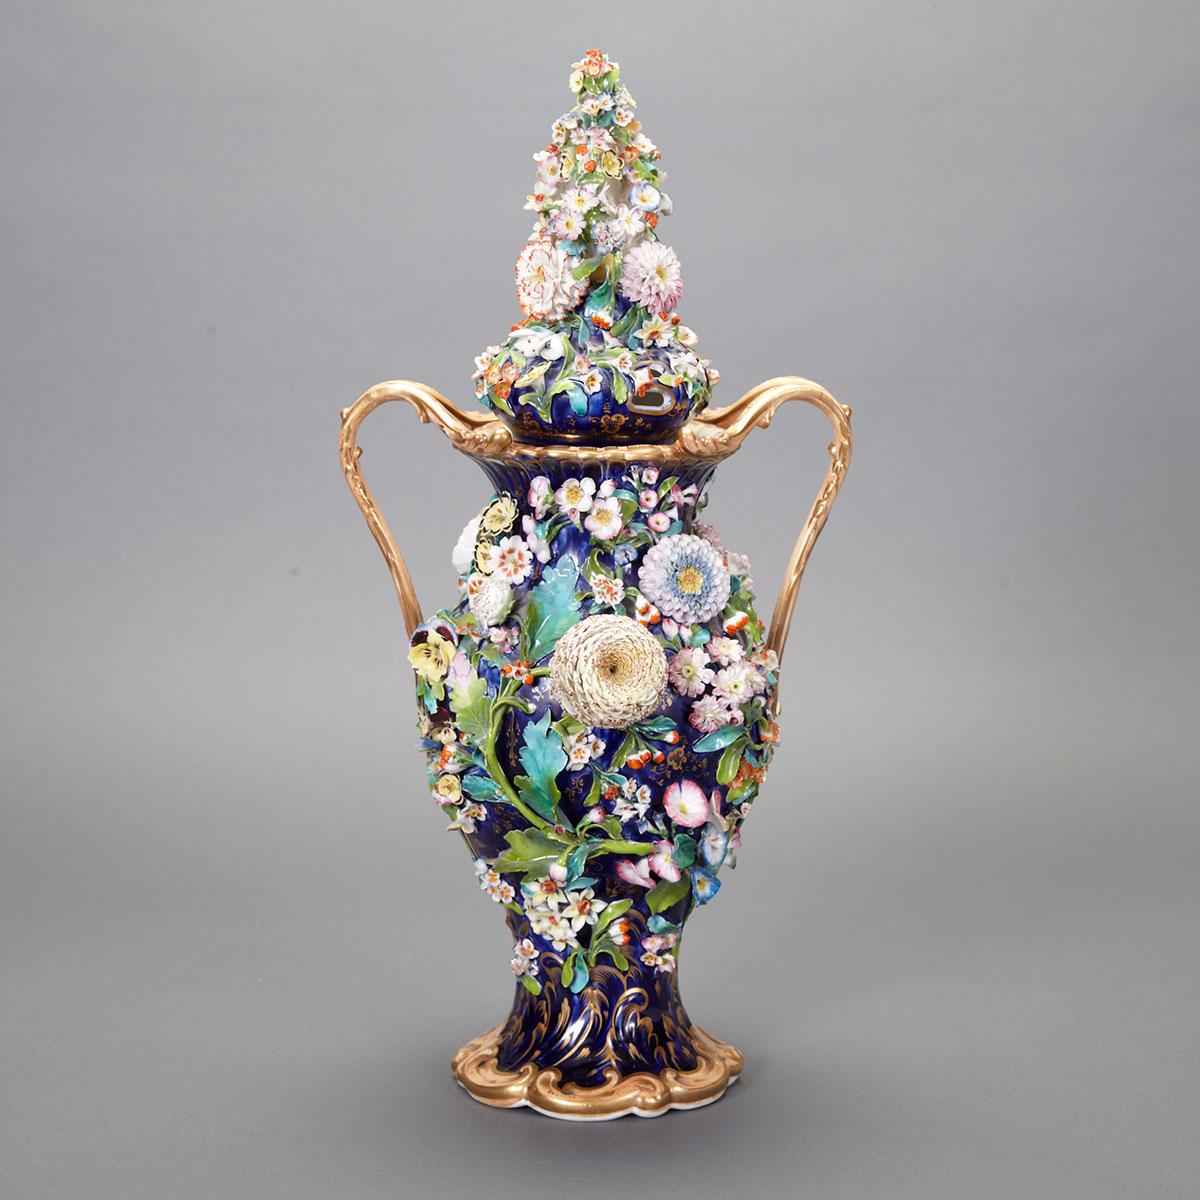 Coalbrookdale Style Two-Handled Vase and Cover, mid-19th century